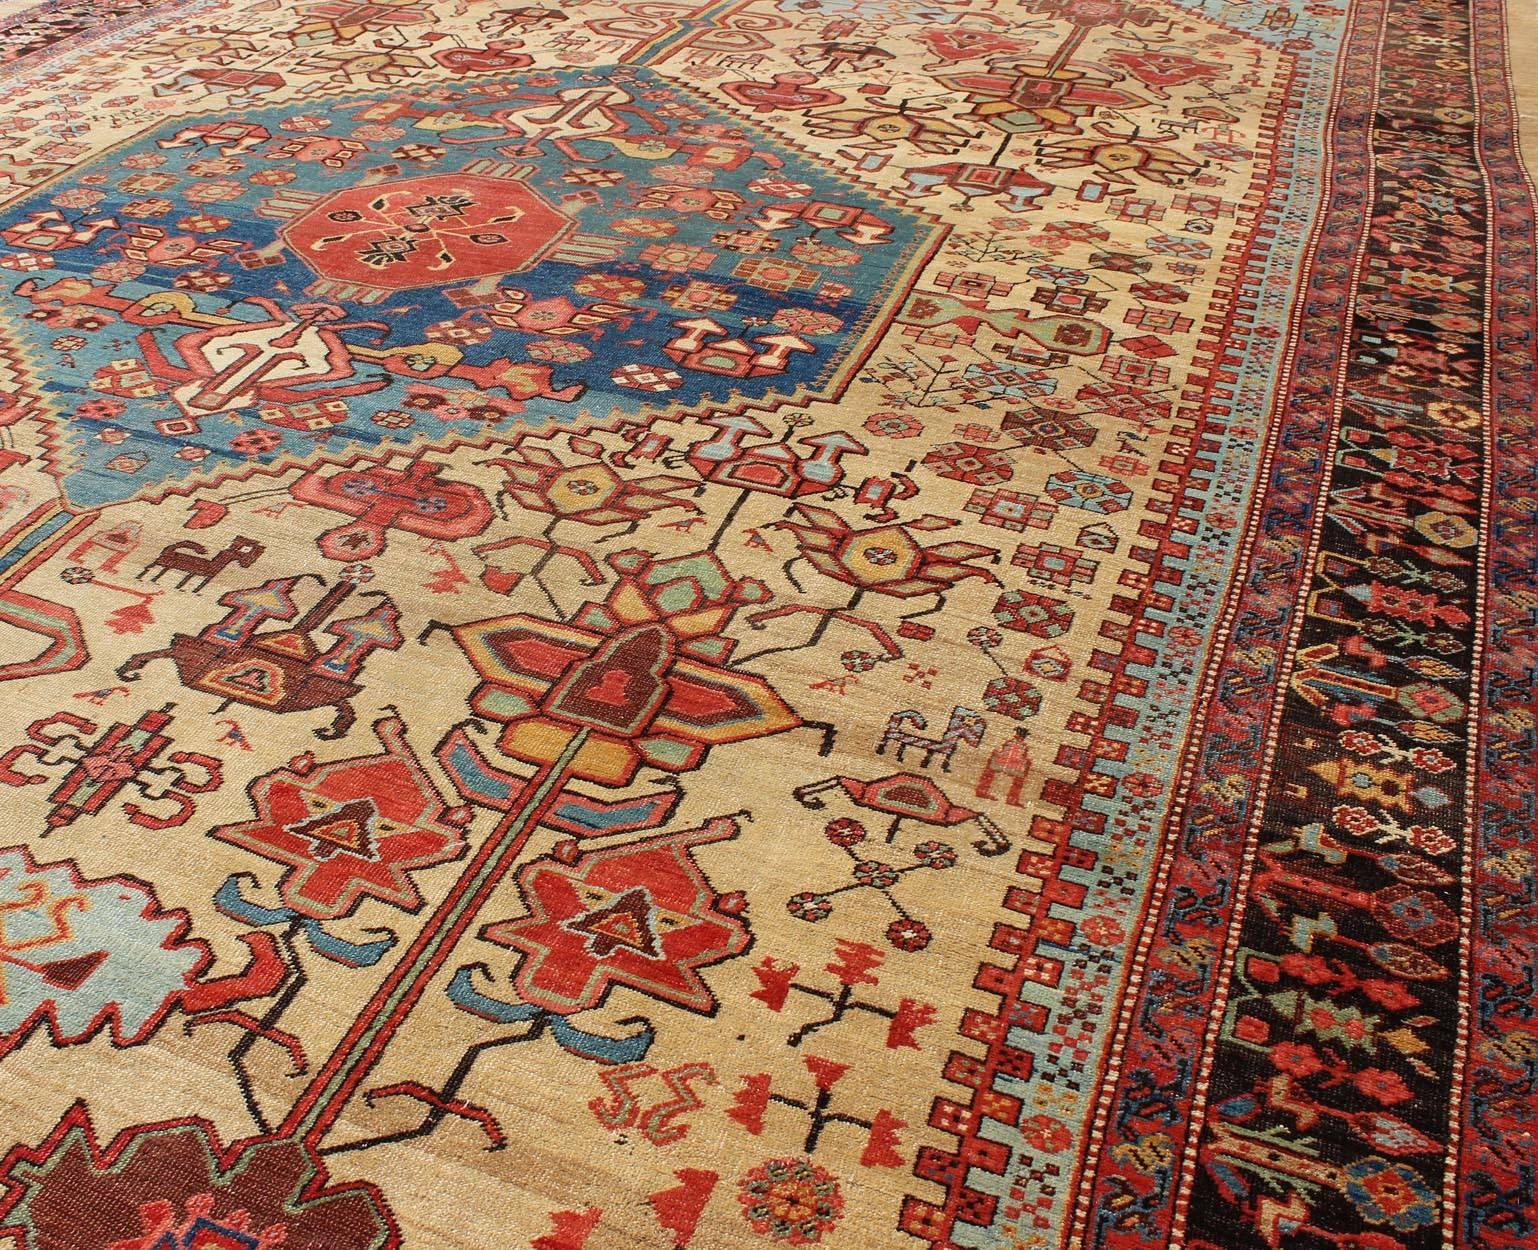 19th Century Antique Persian Bakshaish Rug in Gold, Blue and Multi colors In Excellent Condition For Sale In Atlanta, GA